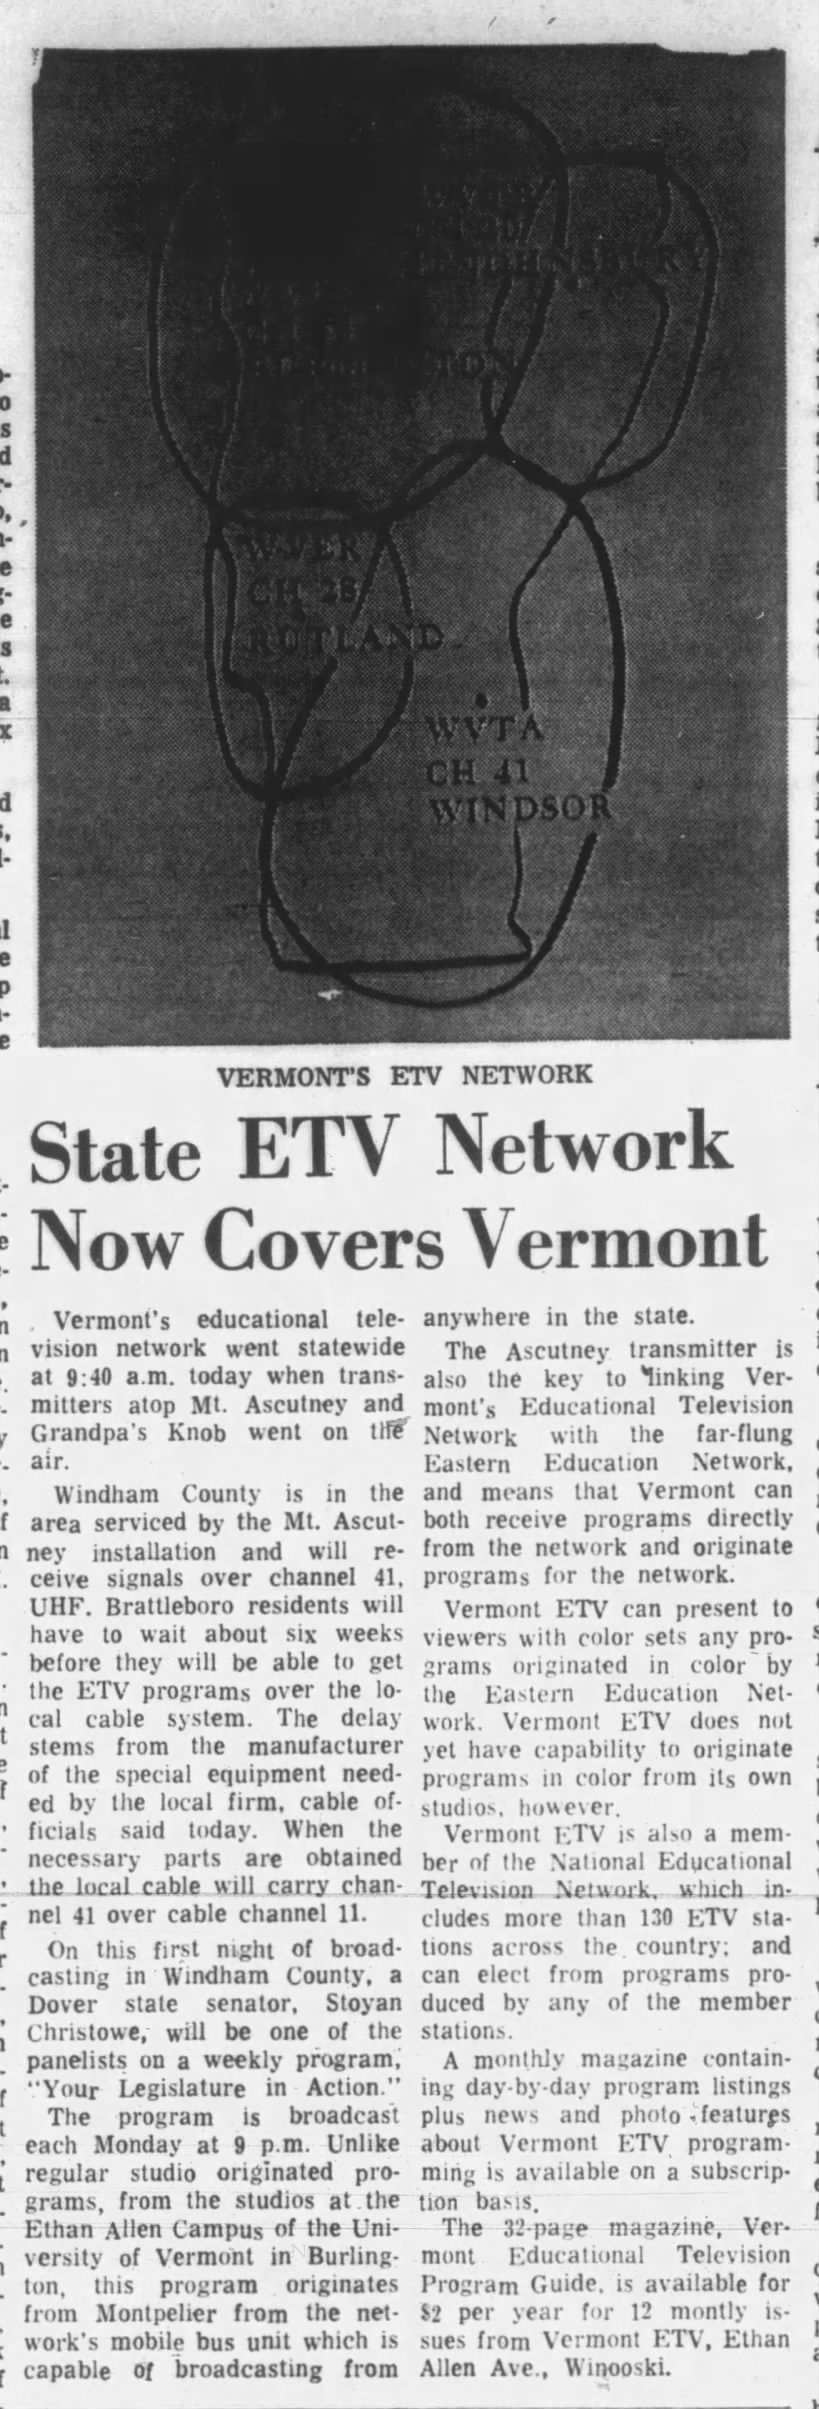 State ETV Network Now Covers Vermont